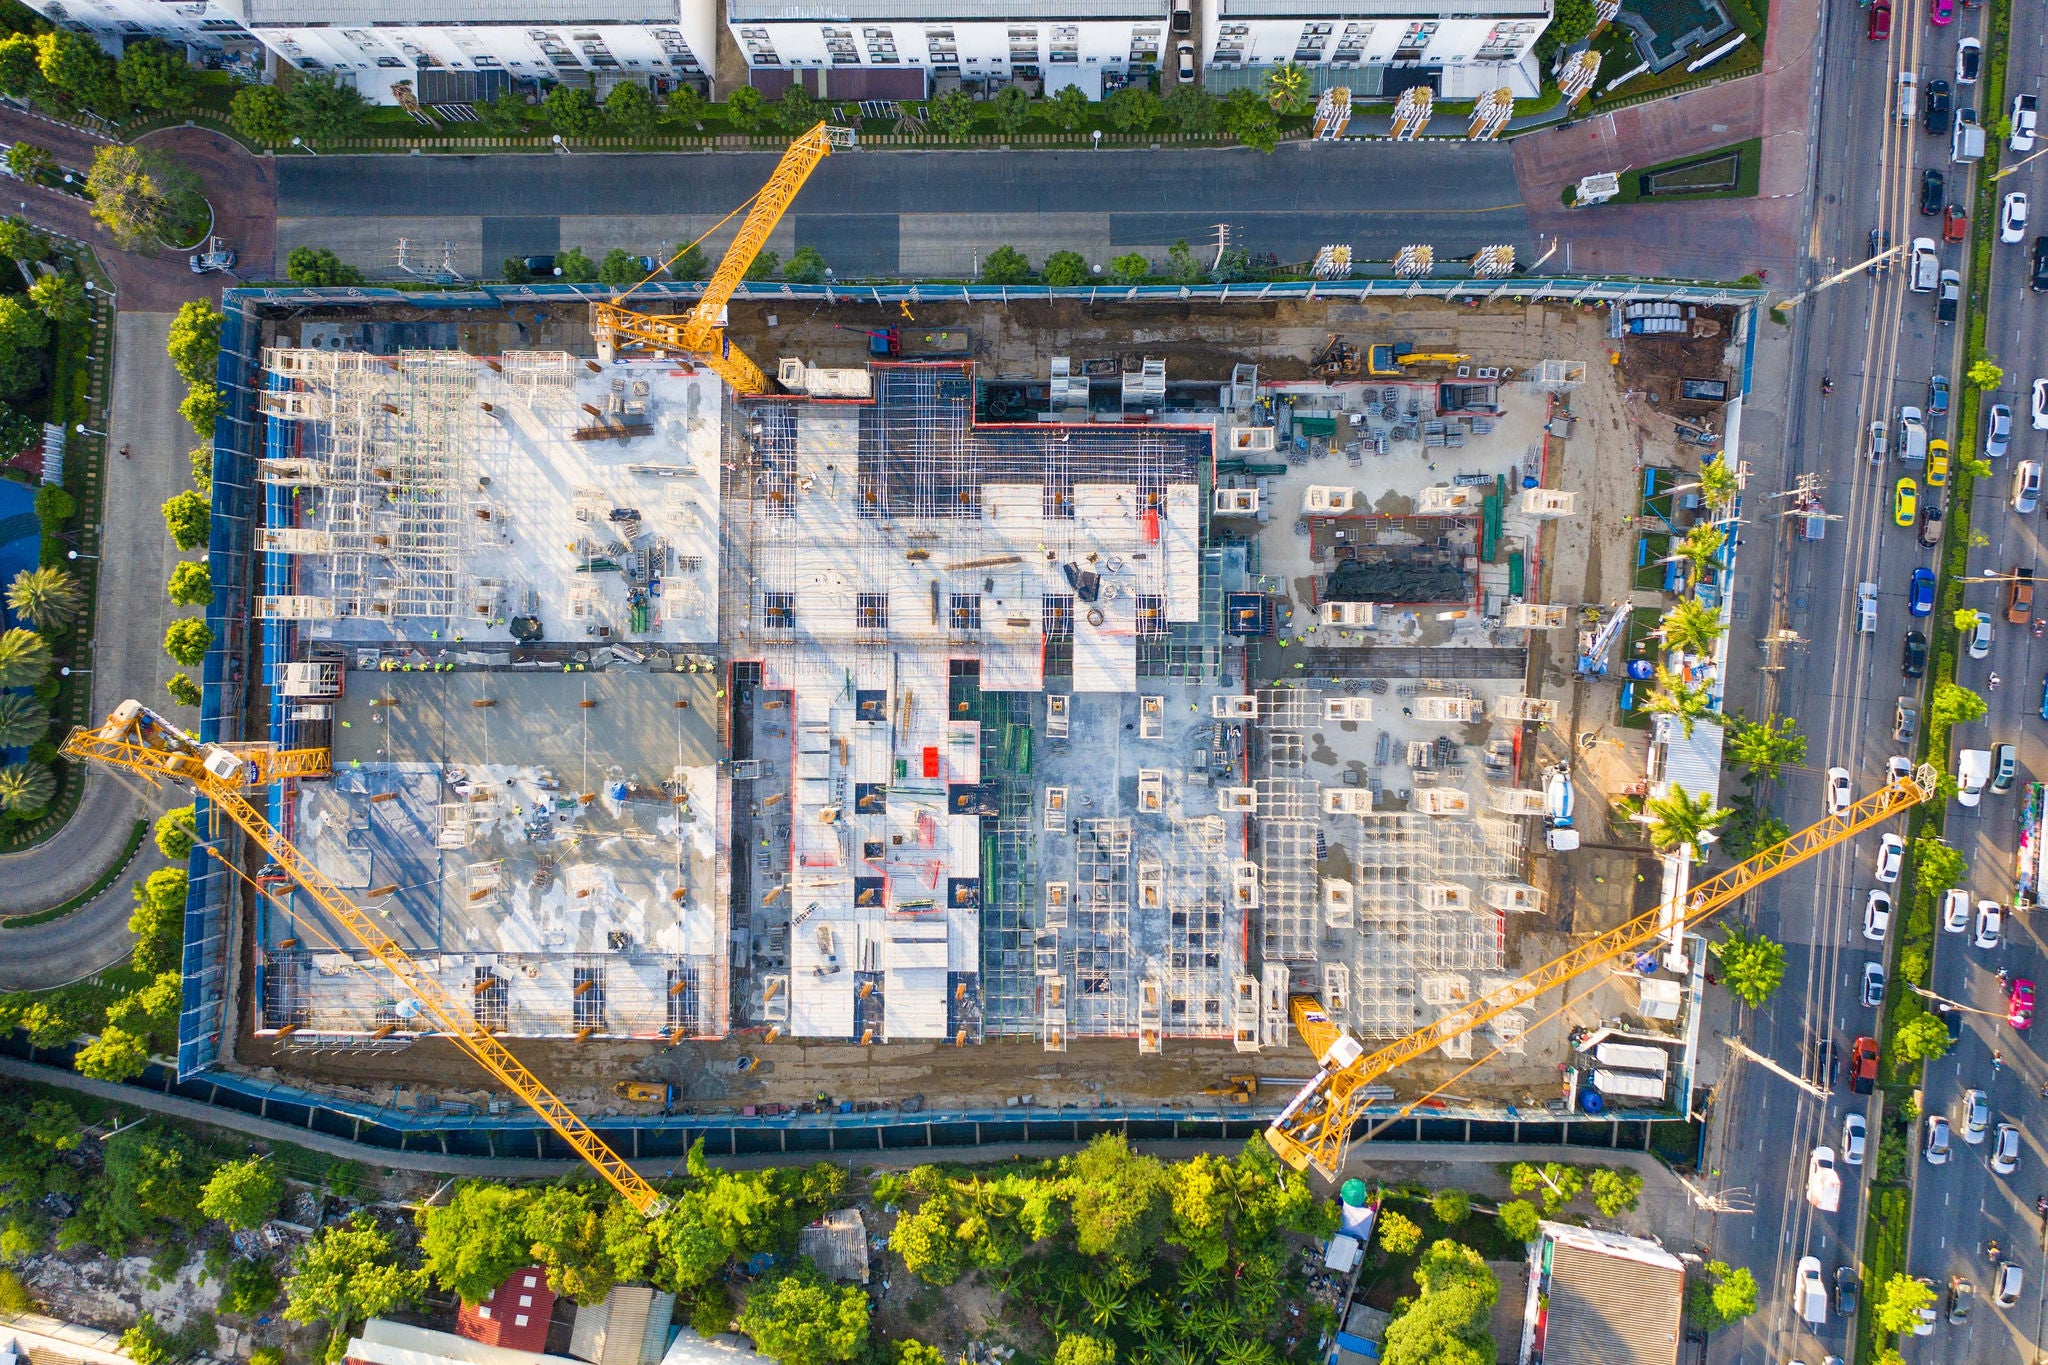 Top view of construction site.